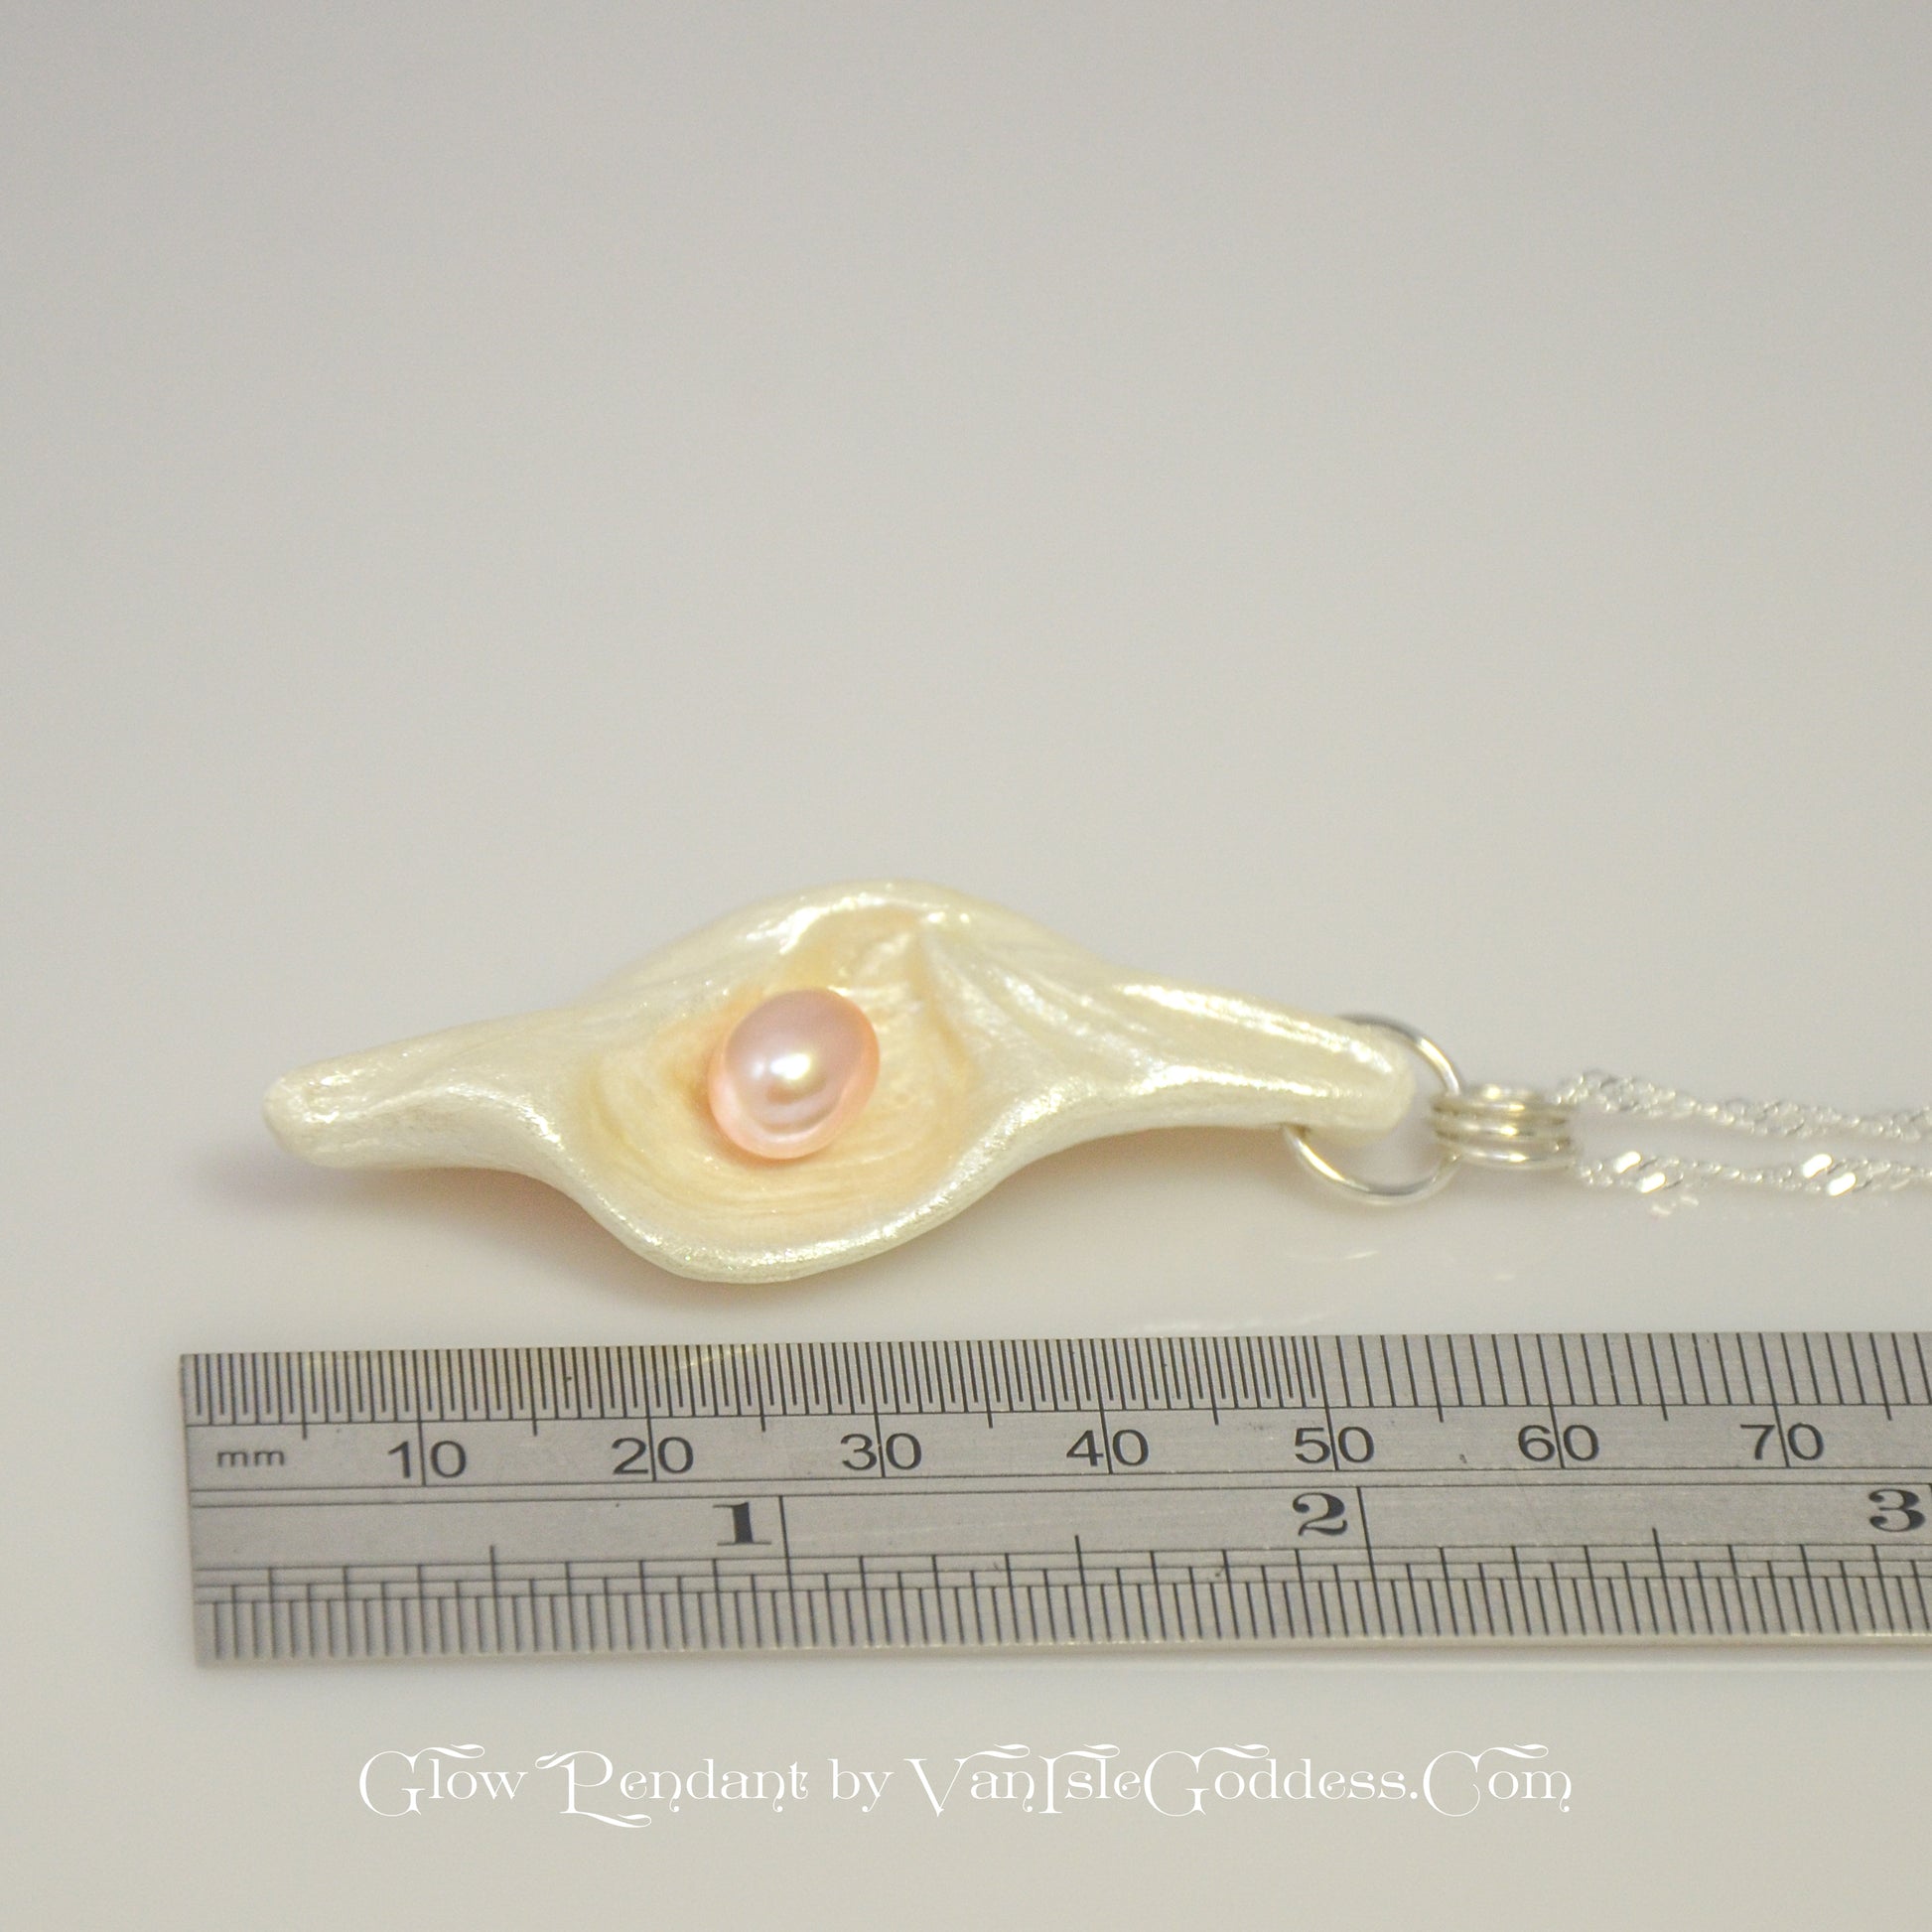 Glow natural seashell pendant with a pink freshwater pearl. The pendant is laying along a ruler so the viewer can see the length of the pendant.